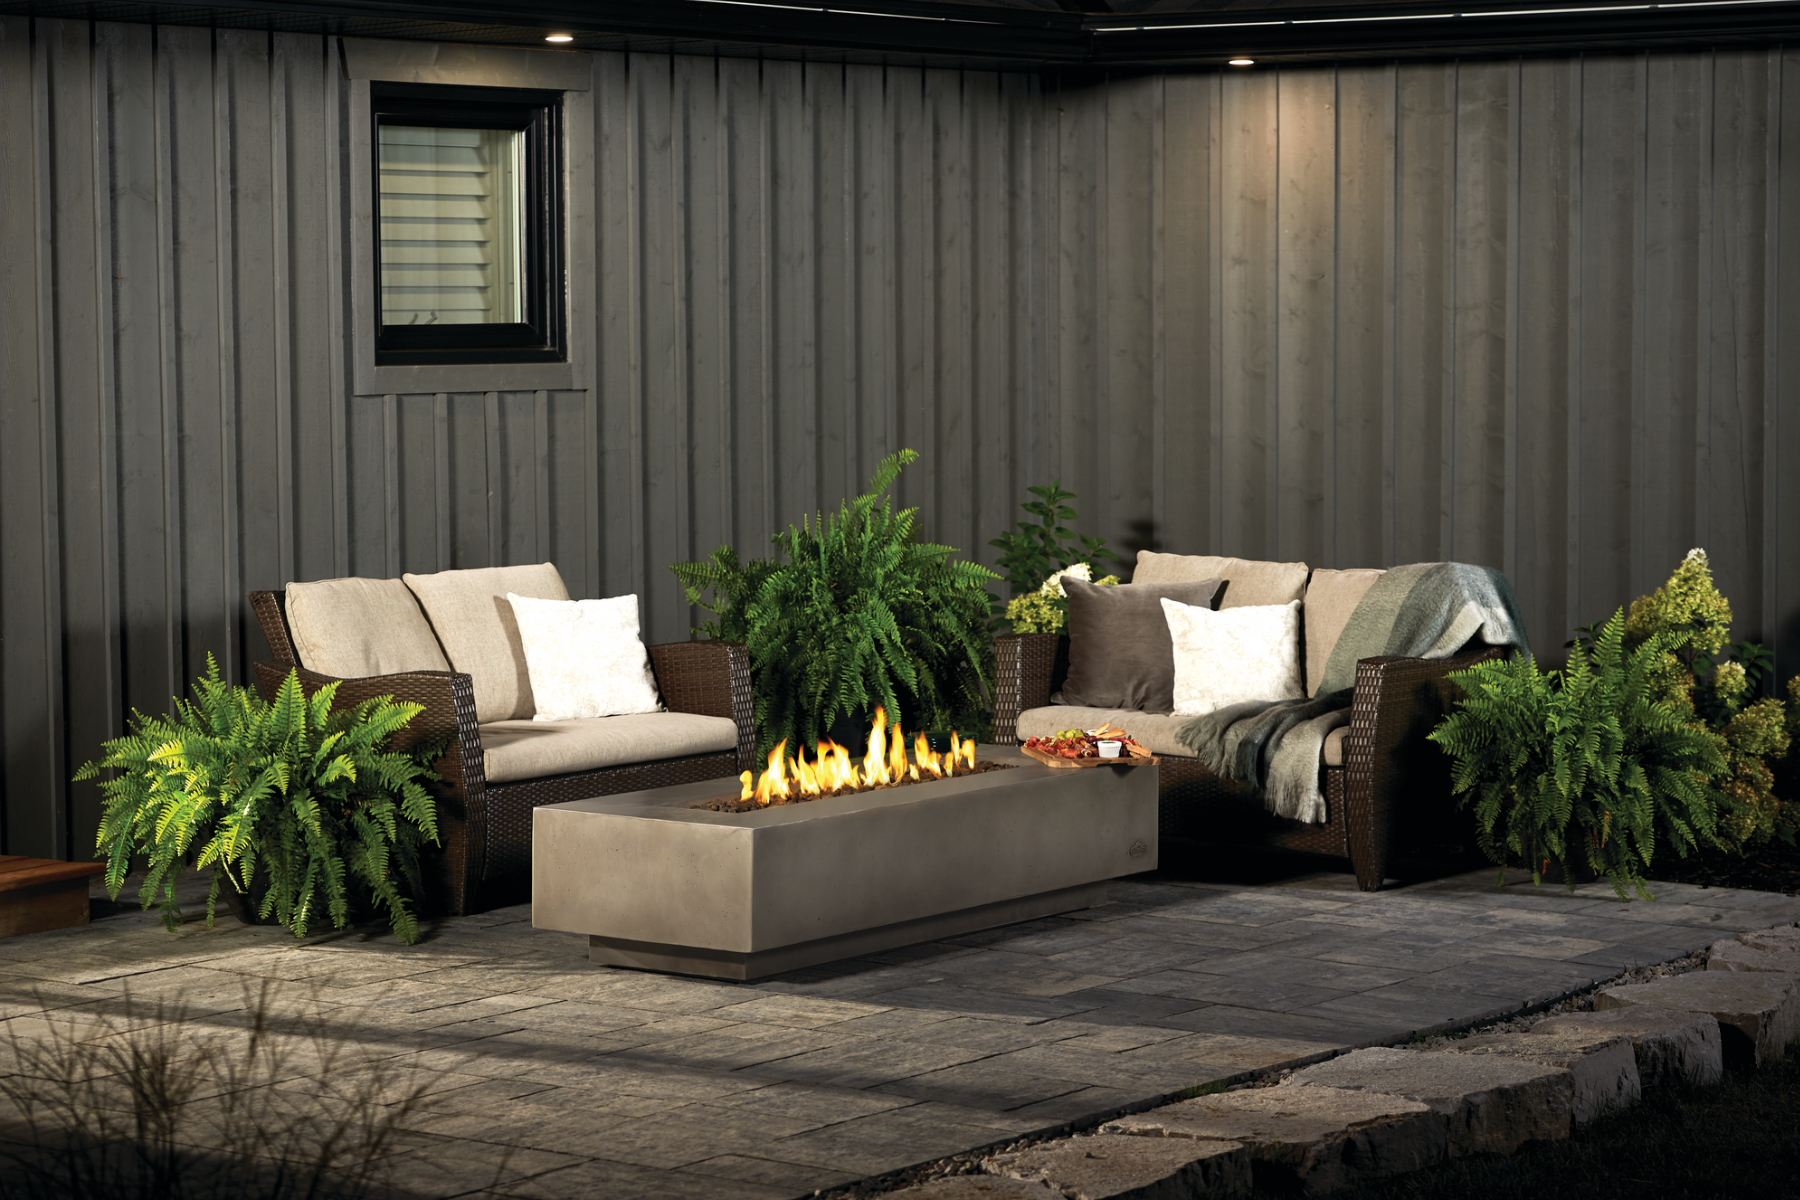 Patio with modern patio set, plants and a firetable